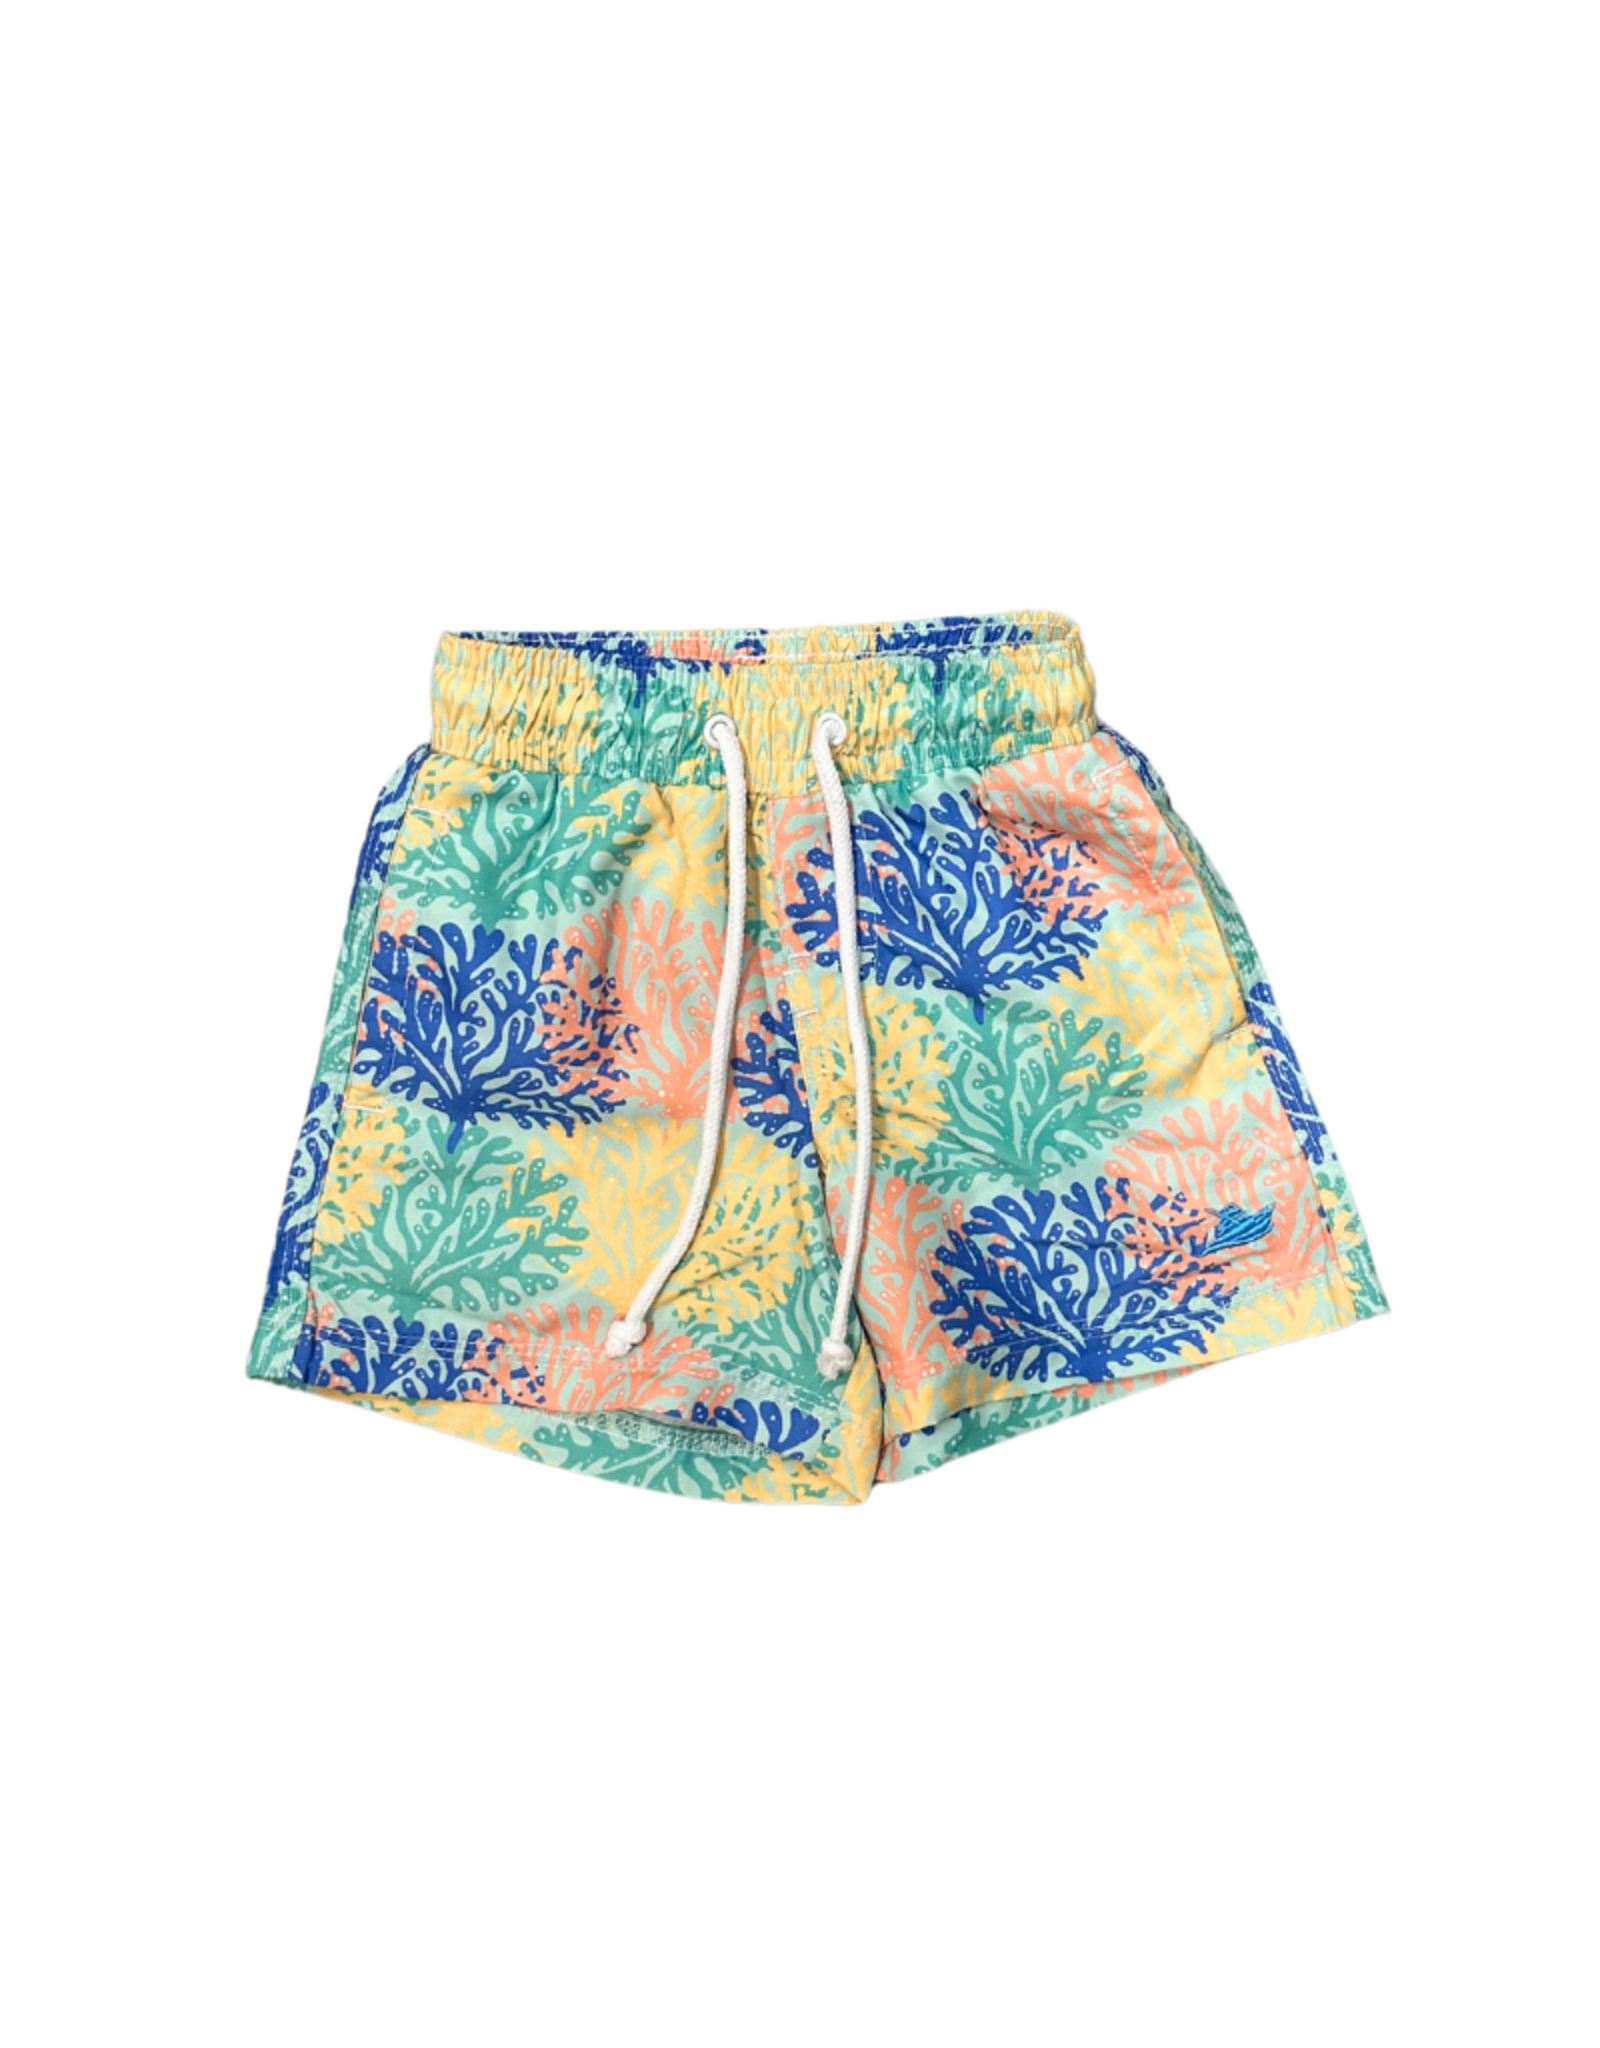 SouthBound Swim Shorts, Coral Reef